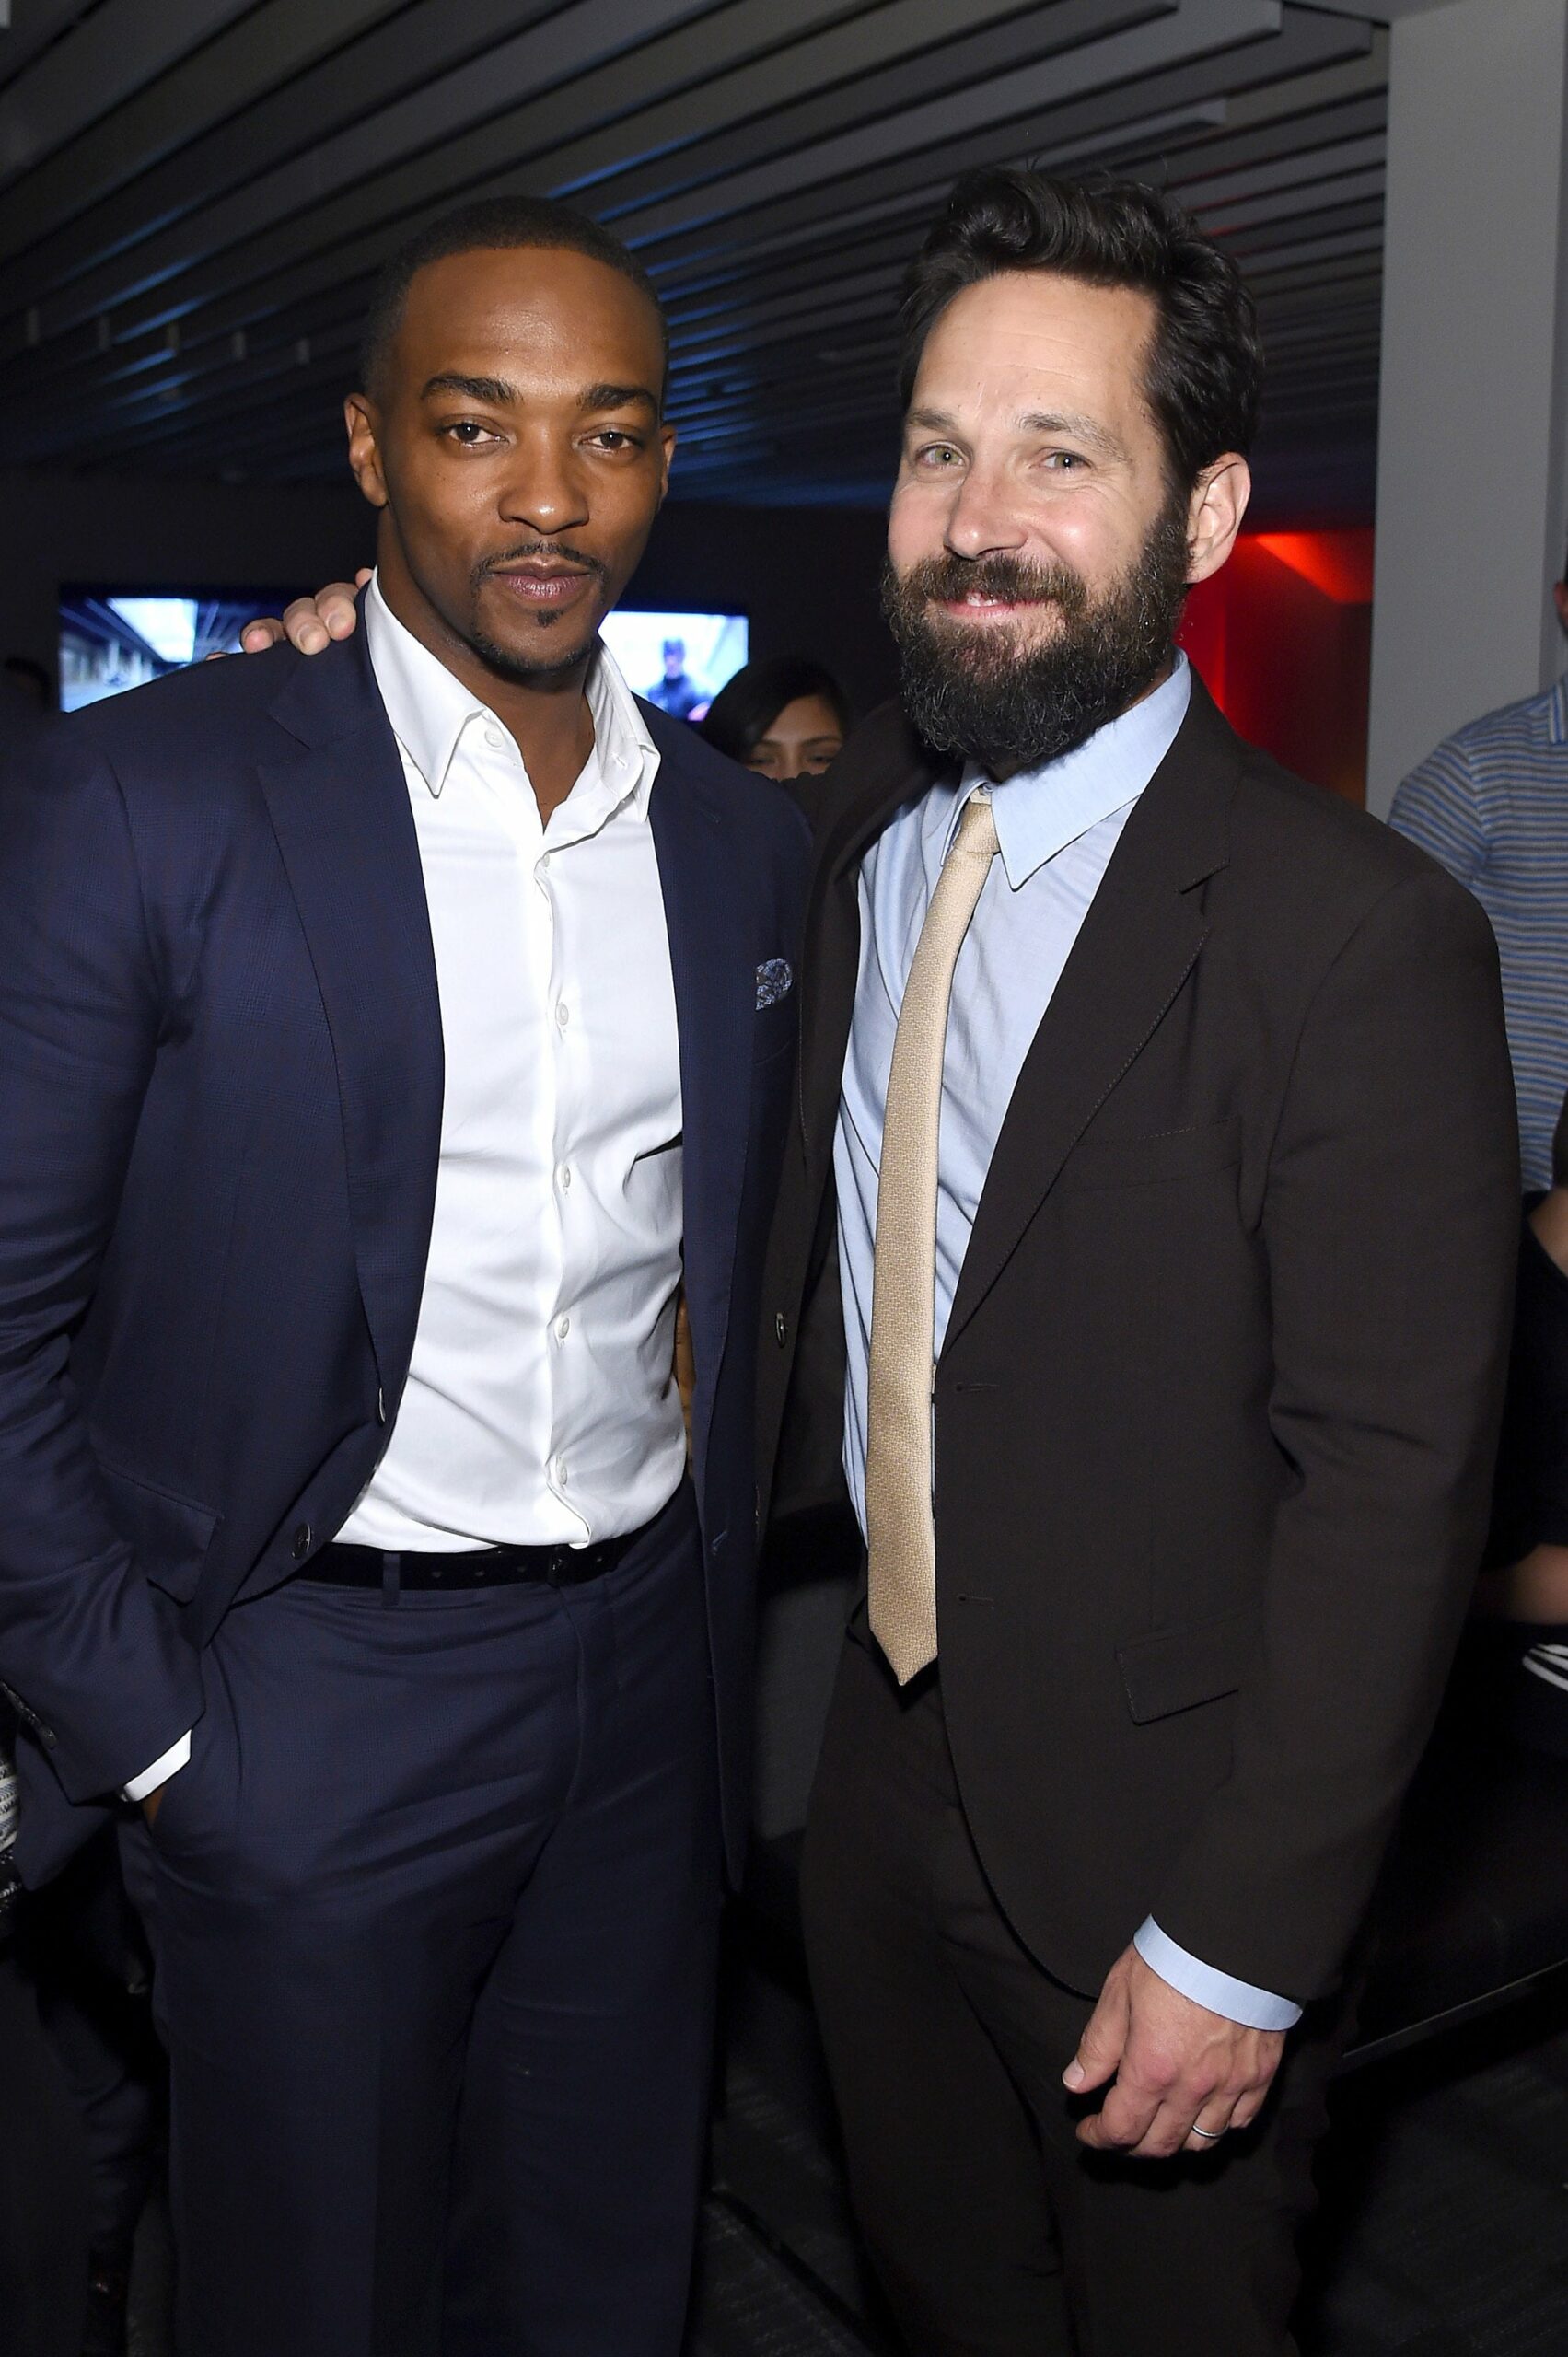 NEW YORK, NY - MAY 04:  Anthony Mackie and Paul Rudd attend the after party for the screening of Marvel's